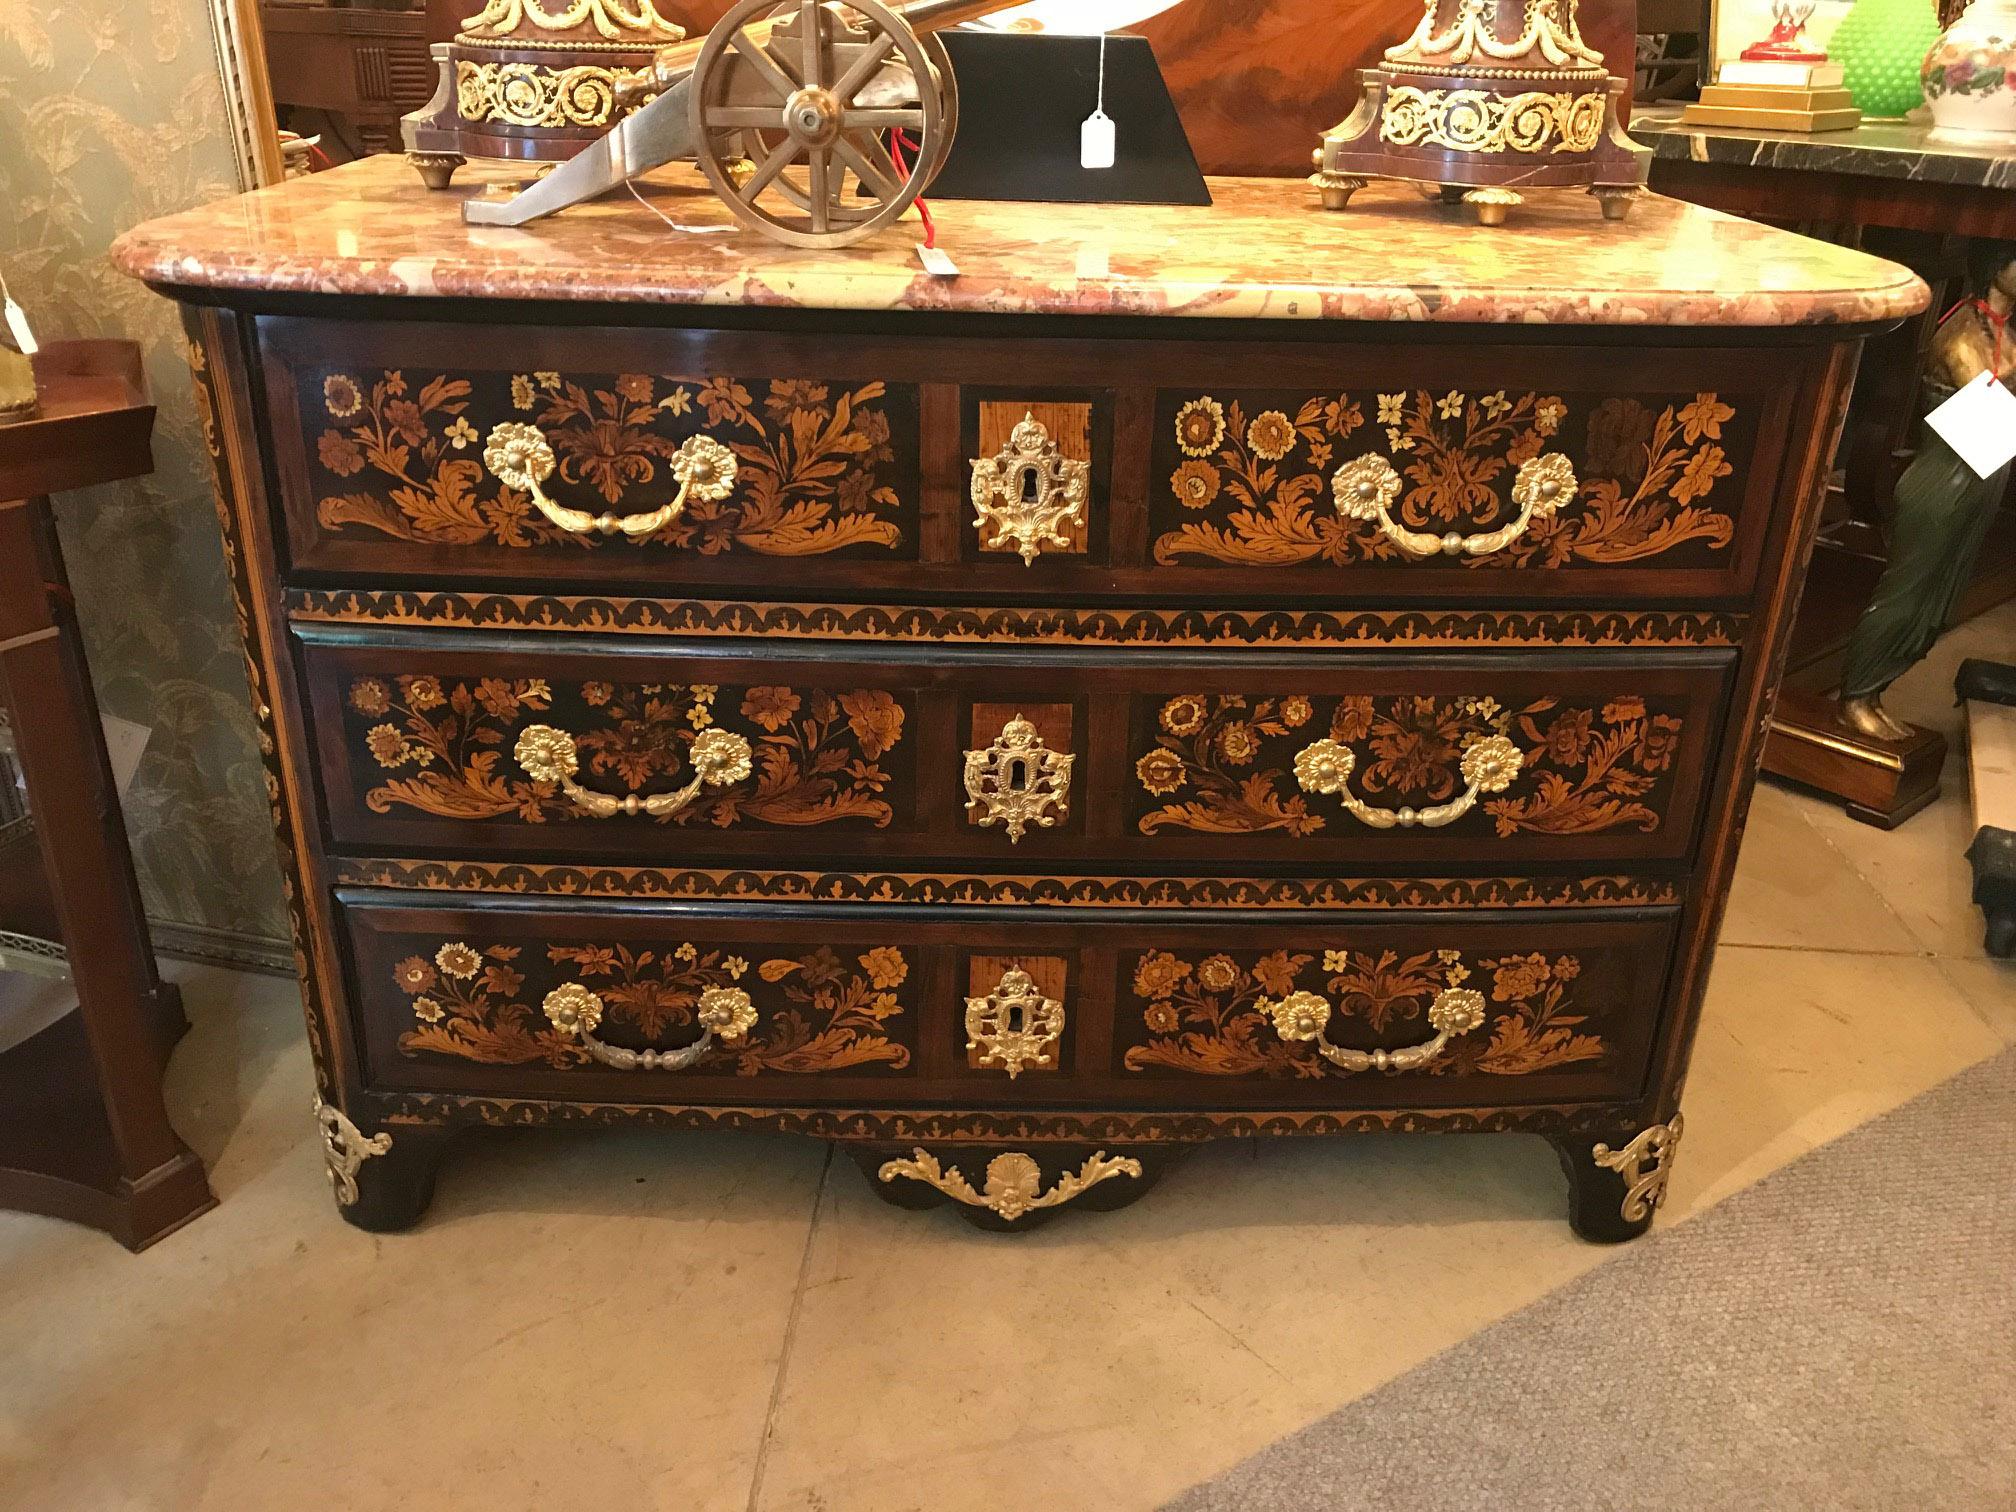 This sumptuous commode once stood in the entrance to a Montreal mansion. Enclosed by three graduated drawers, the front and curved sides are profusely inlaid with panels of floral marquetry. The bronze bail handles are cast and gilt. The beveled